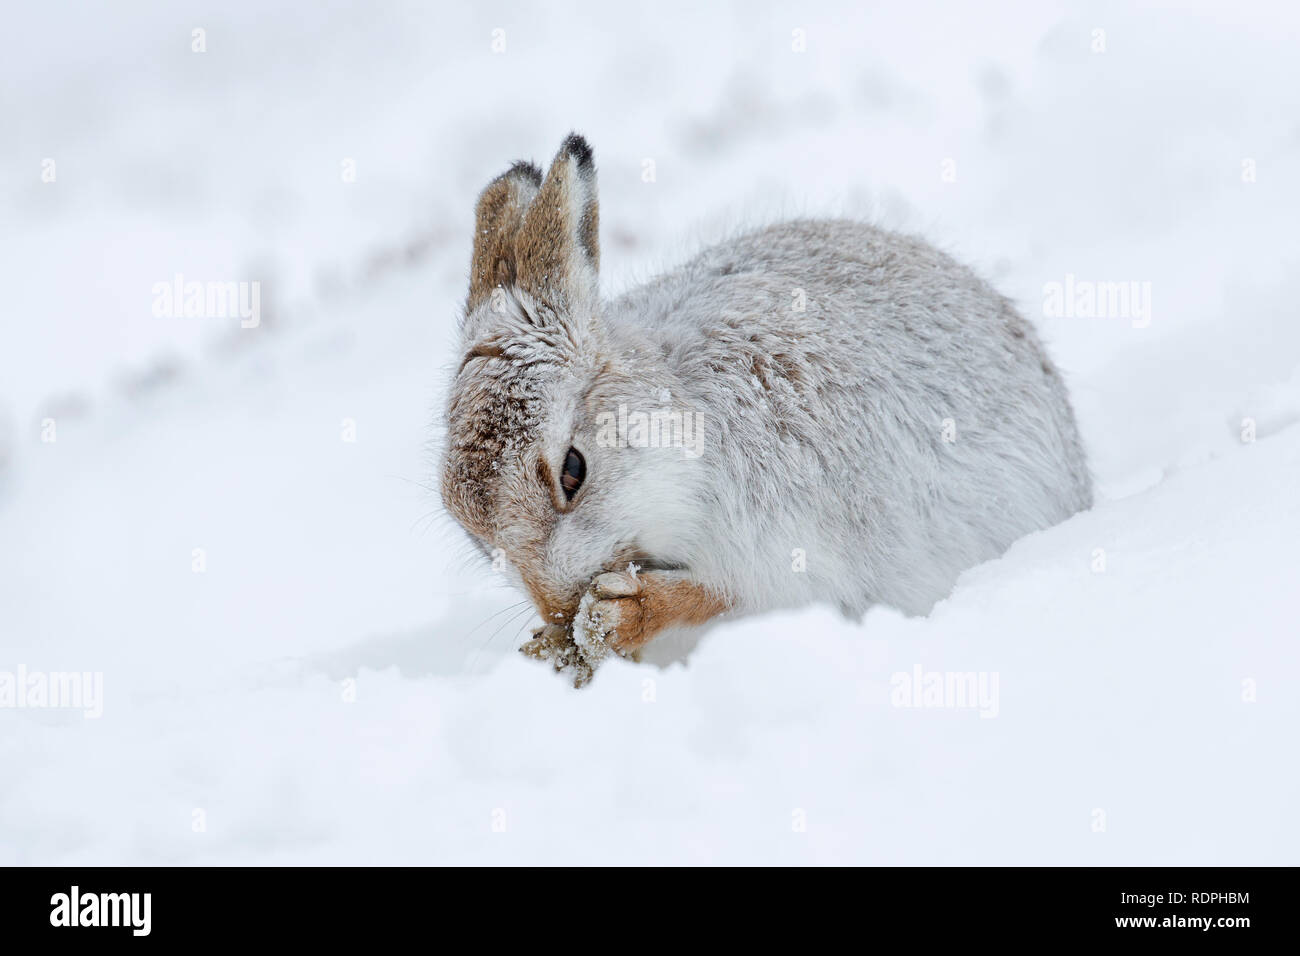 Mountain hare / Alpine hare / snow hare (Lepus timidus) in white winter pelage grooming fur Stock Photo